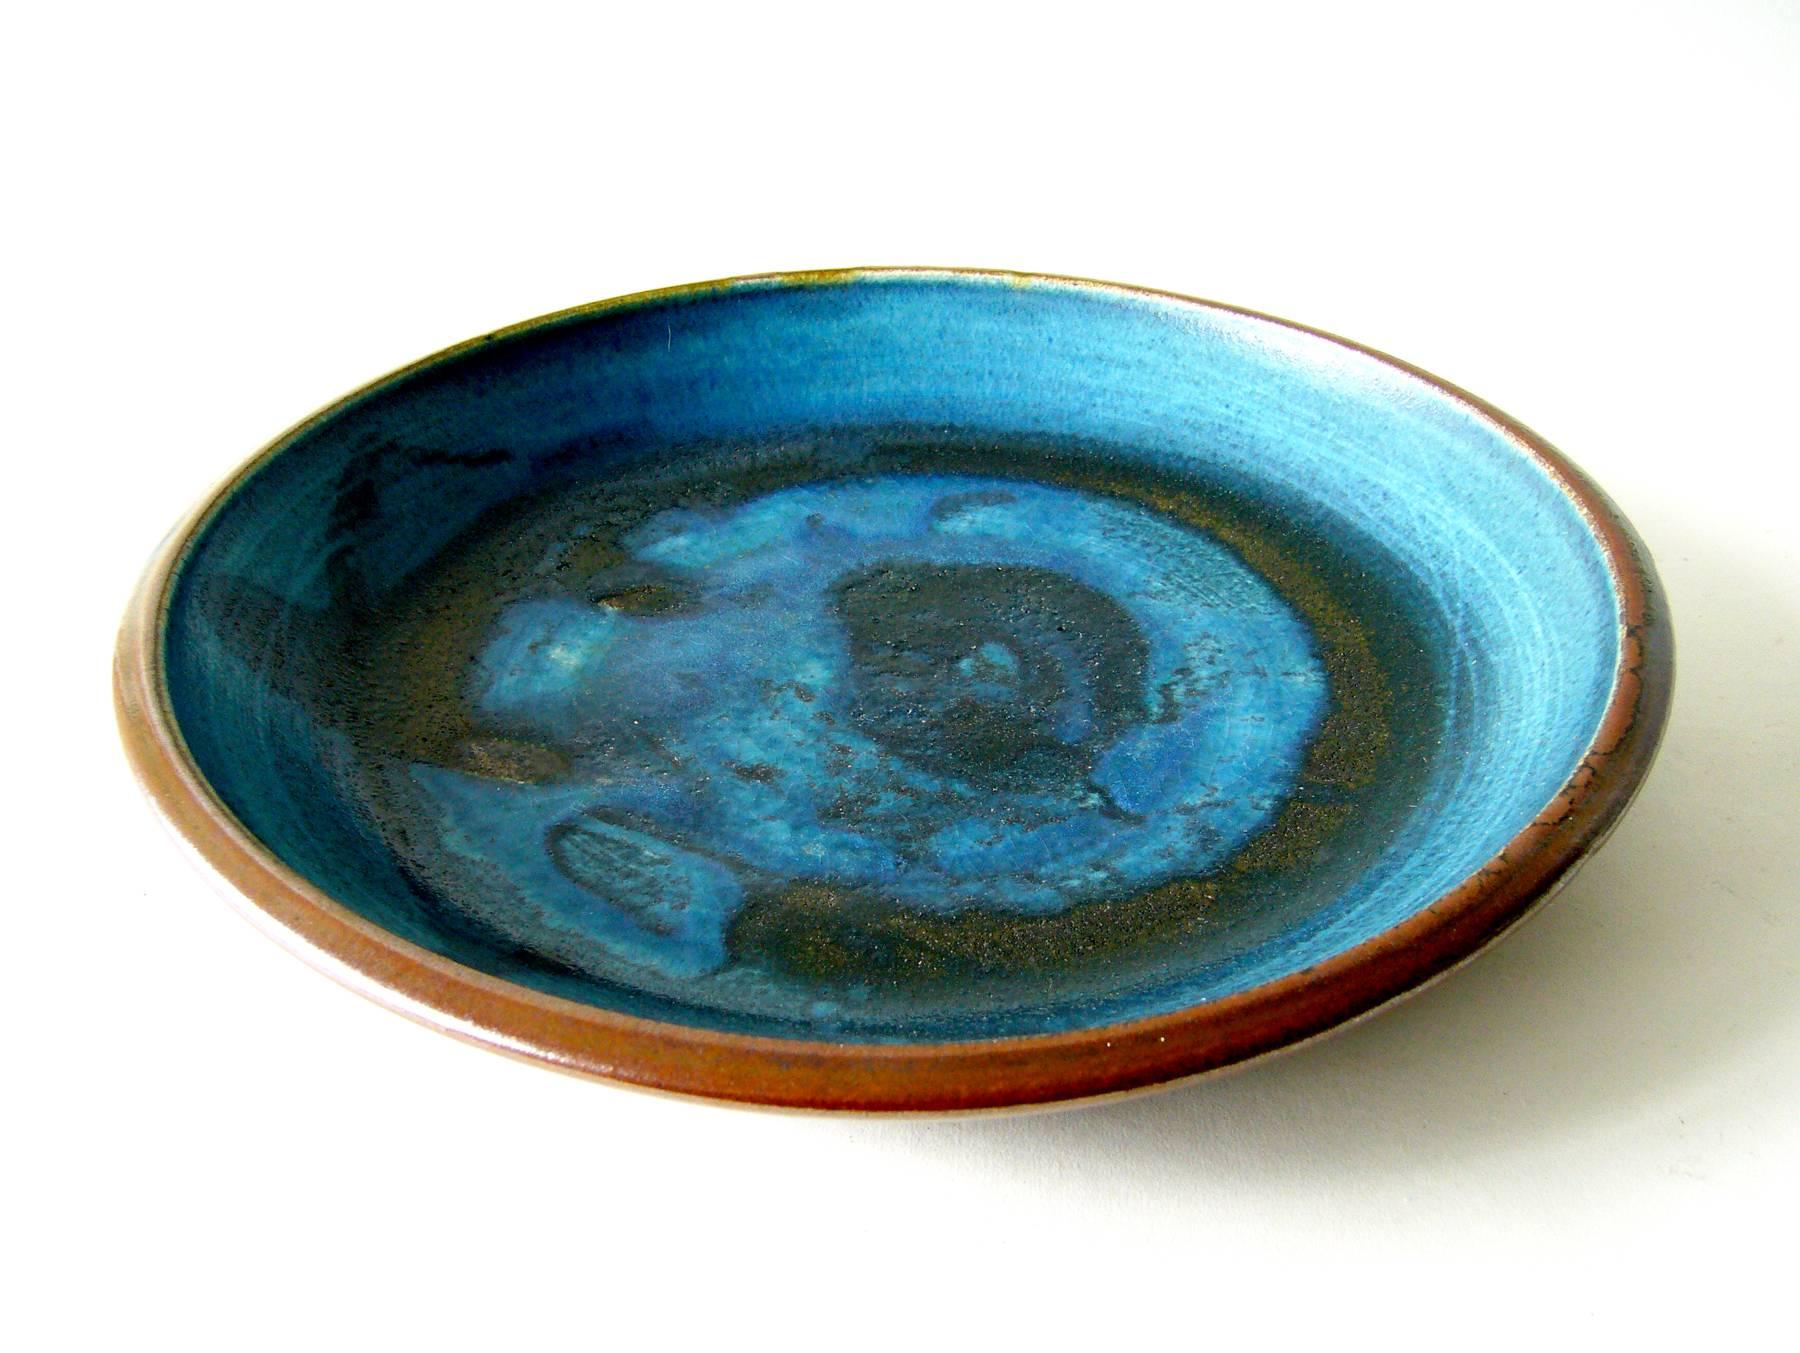 Abstract Expressionist glazed low bowl or charger created by Toshiko Takaezu of Honolulu, Hawaii. Bowl measures 12.5" in diameter by 2" high and is signed with artist's mark of TT beneath. In very good vintage condition.